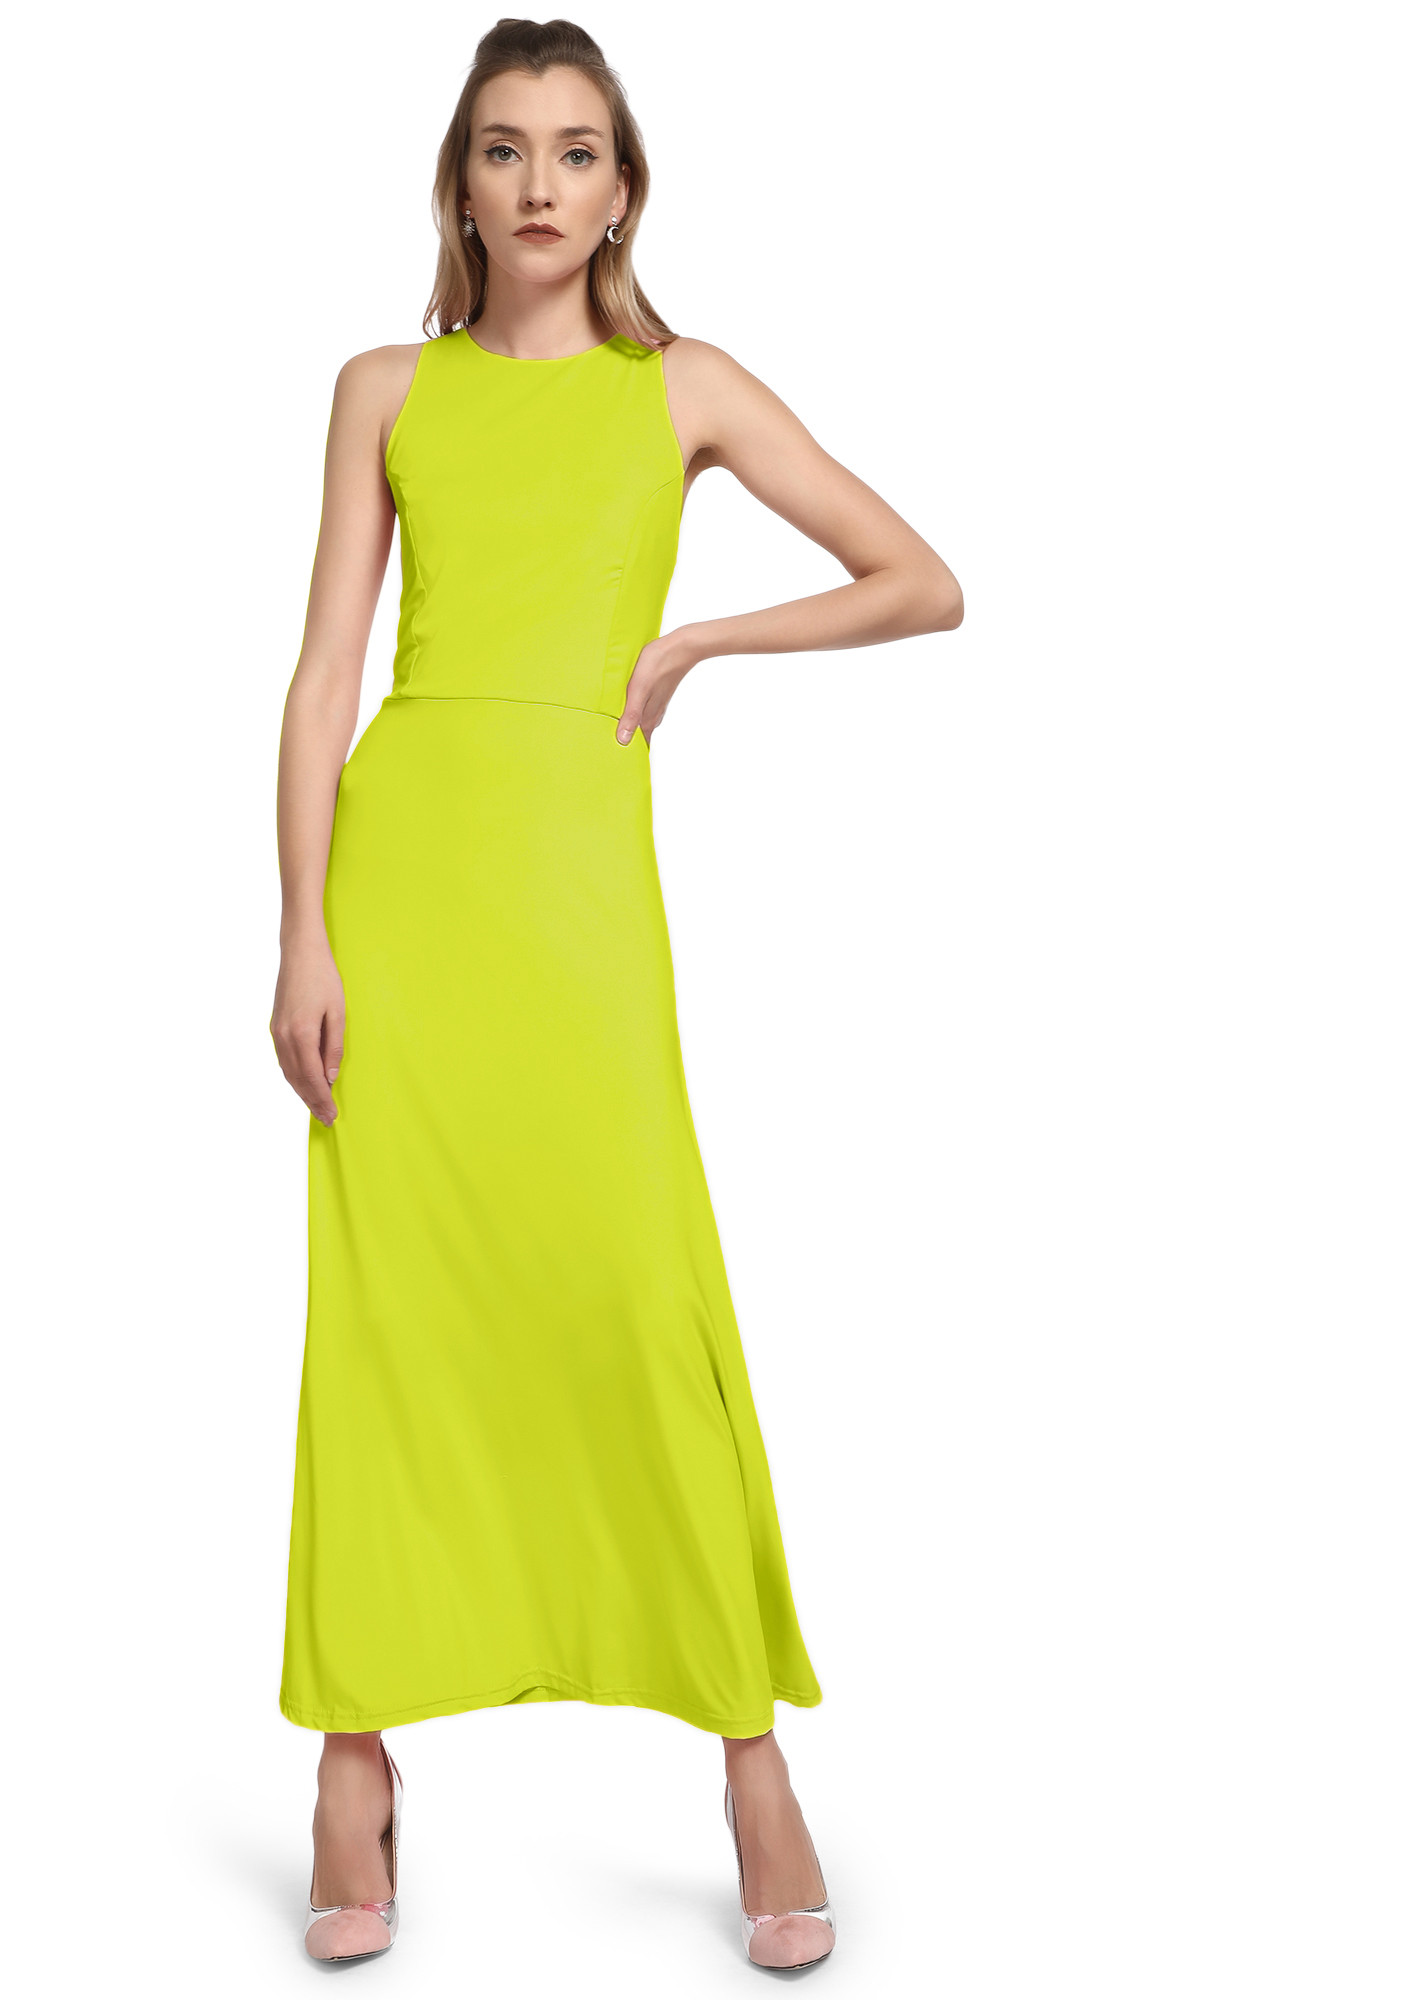 SEEING GOOD IN EVERYTHING YELLOW MAXI DRESS